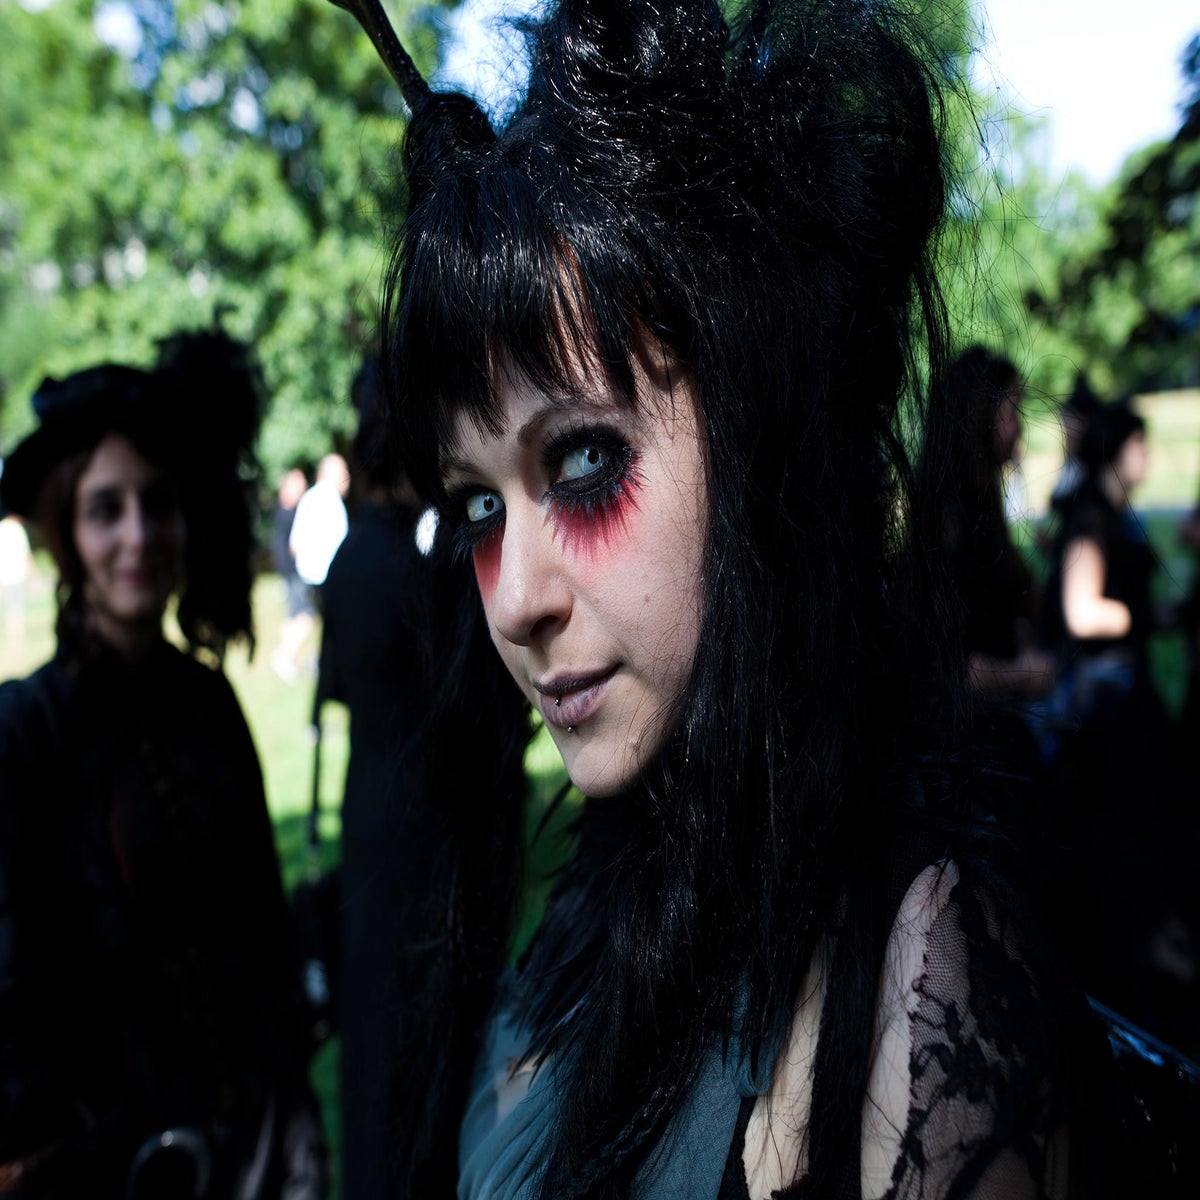 World Goth Day: Shedding Some Light On The Darkness Of A Much Maligned Subculture